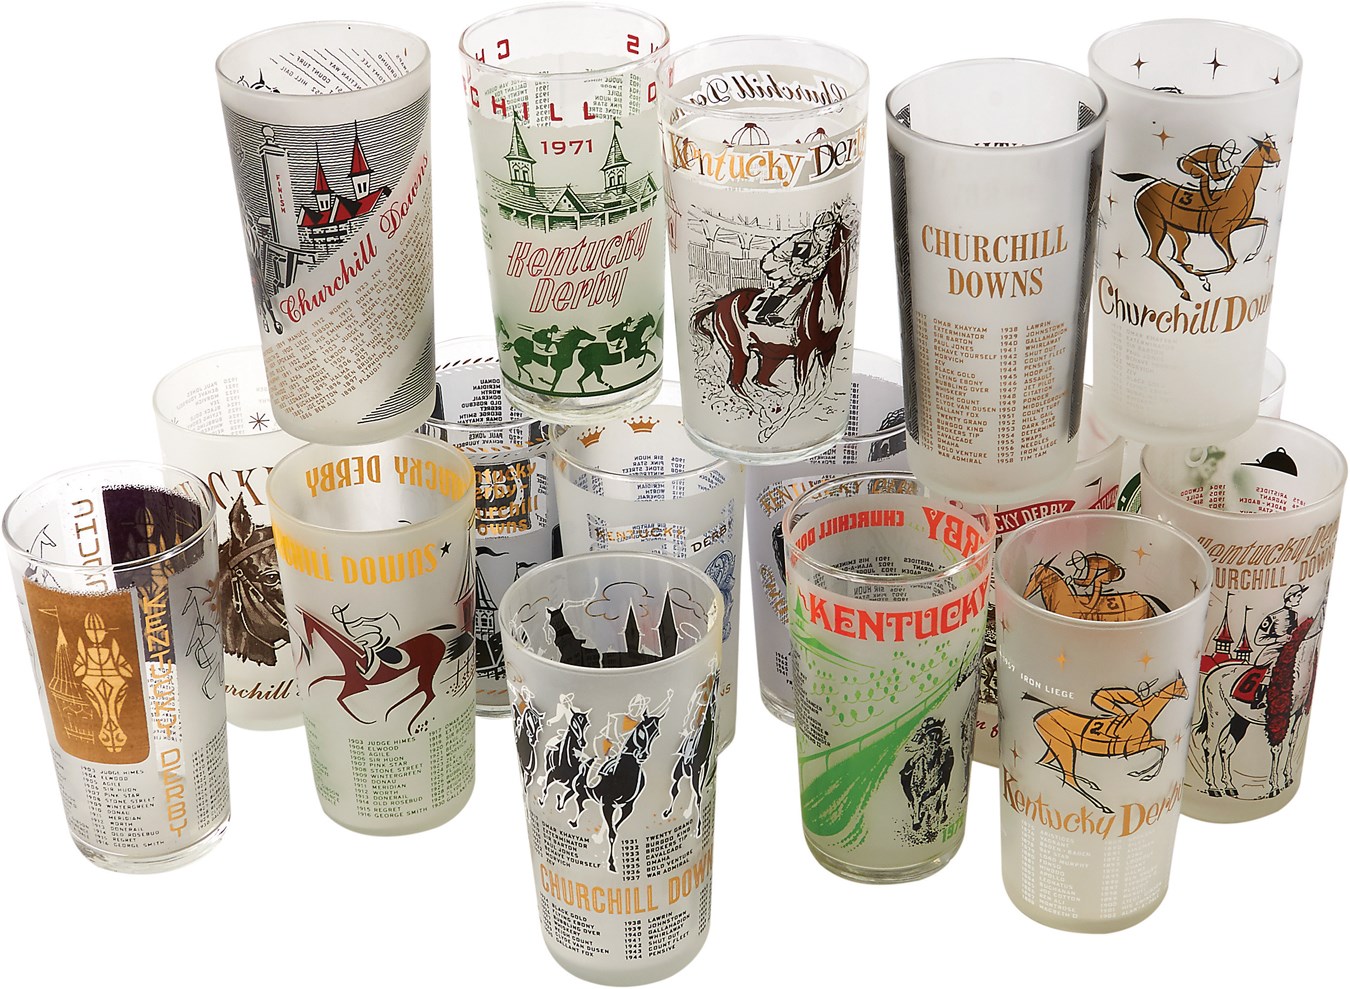 1945-2016 Complete Run of Kentucky Derby Glasses (74) (Excluding only the 1947 blank partially frosted glass)